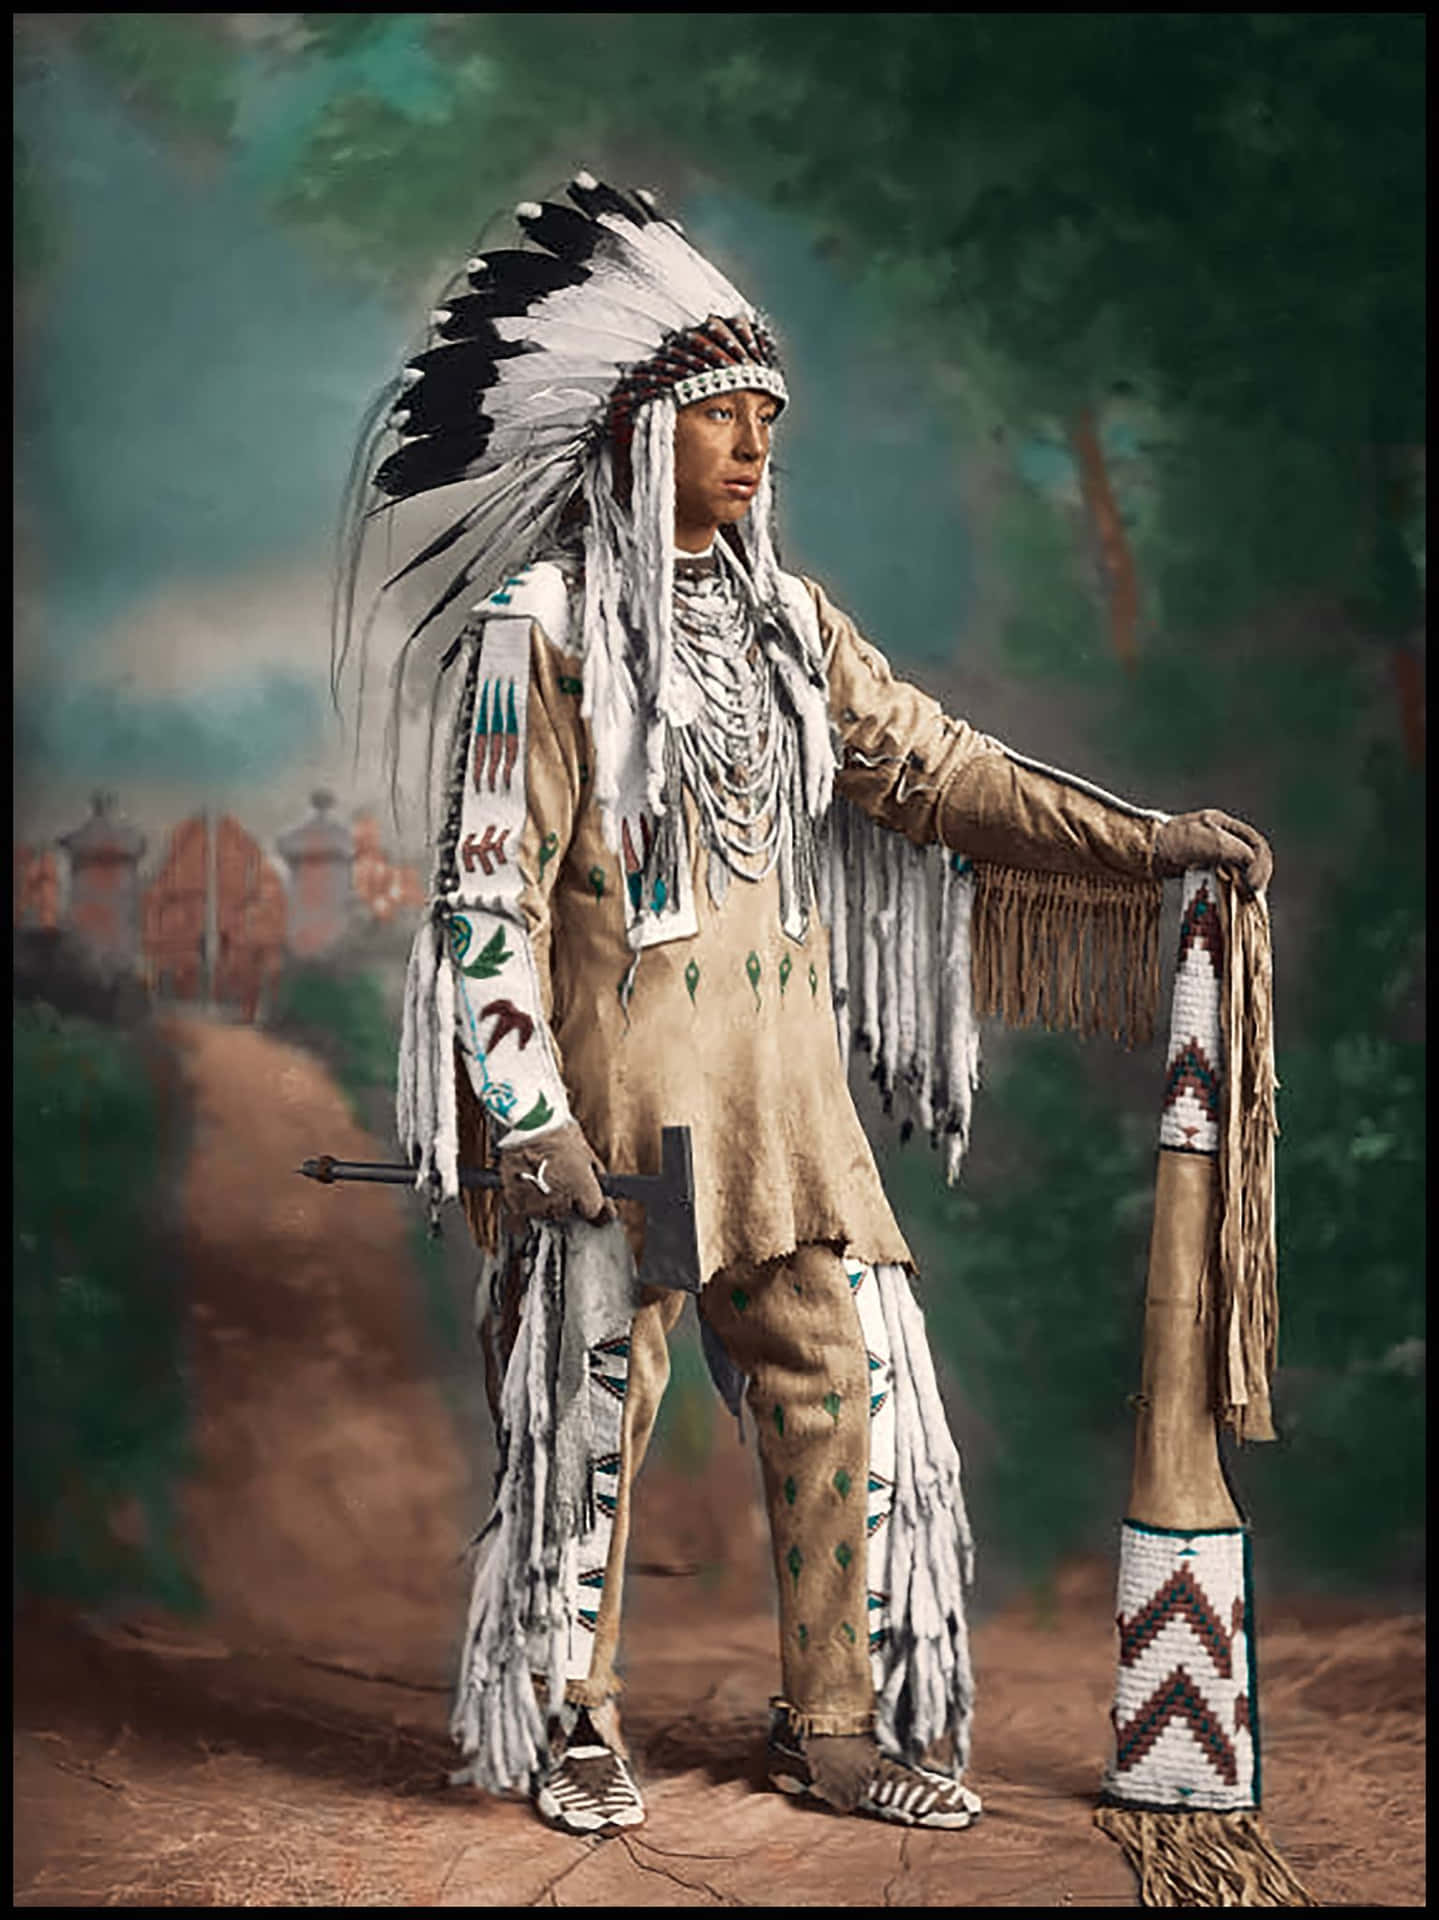 A Man In Native American Costume Holding An Axe